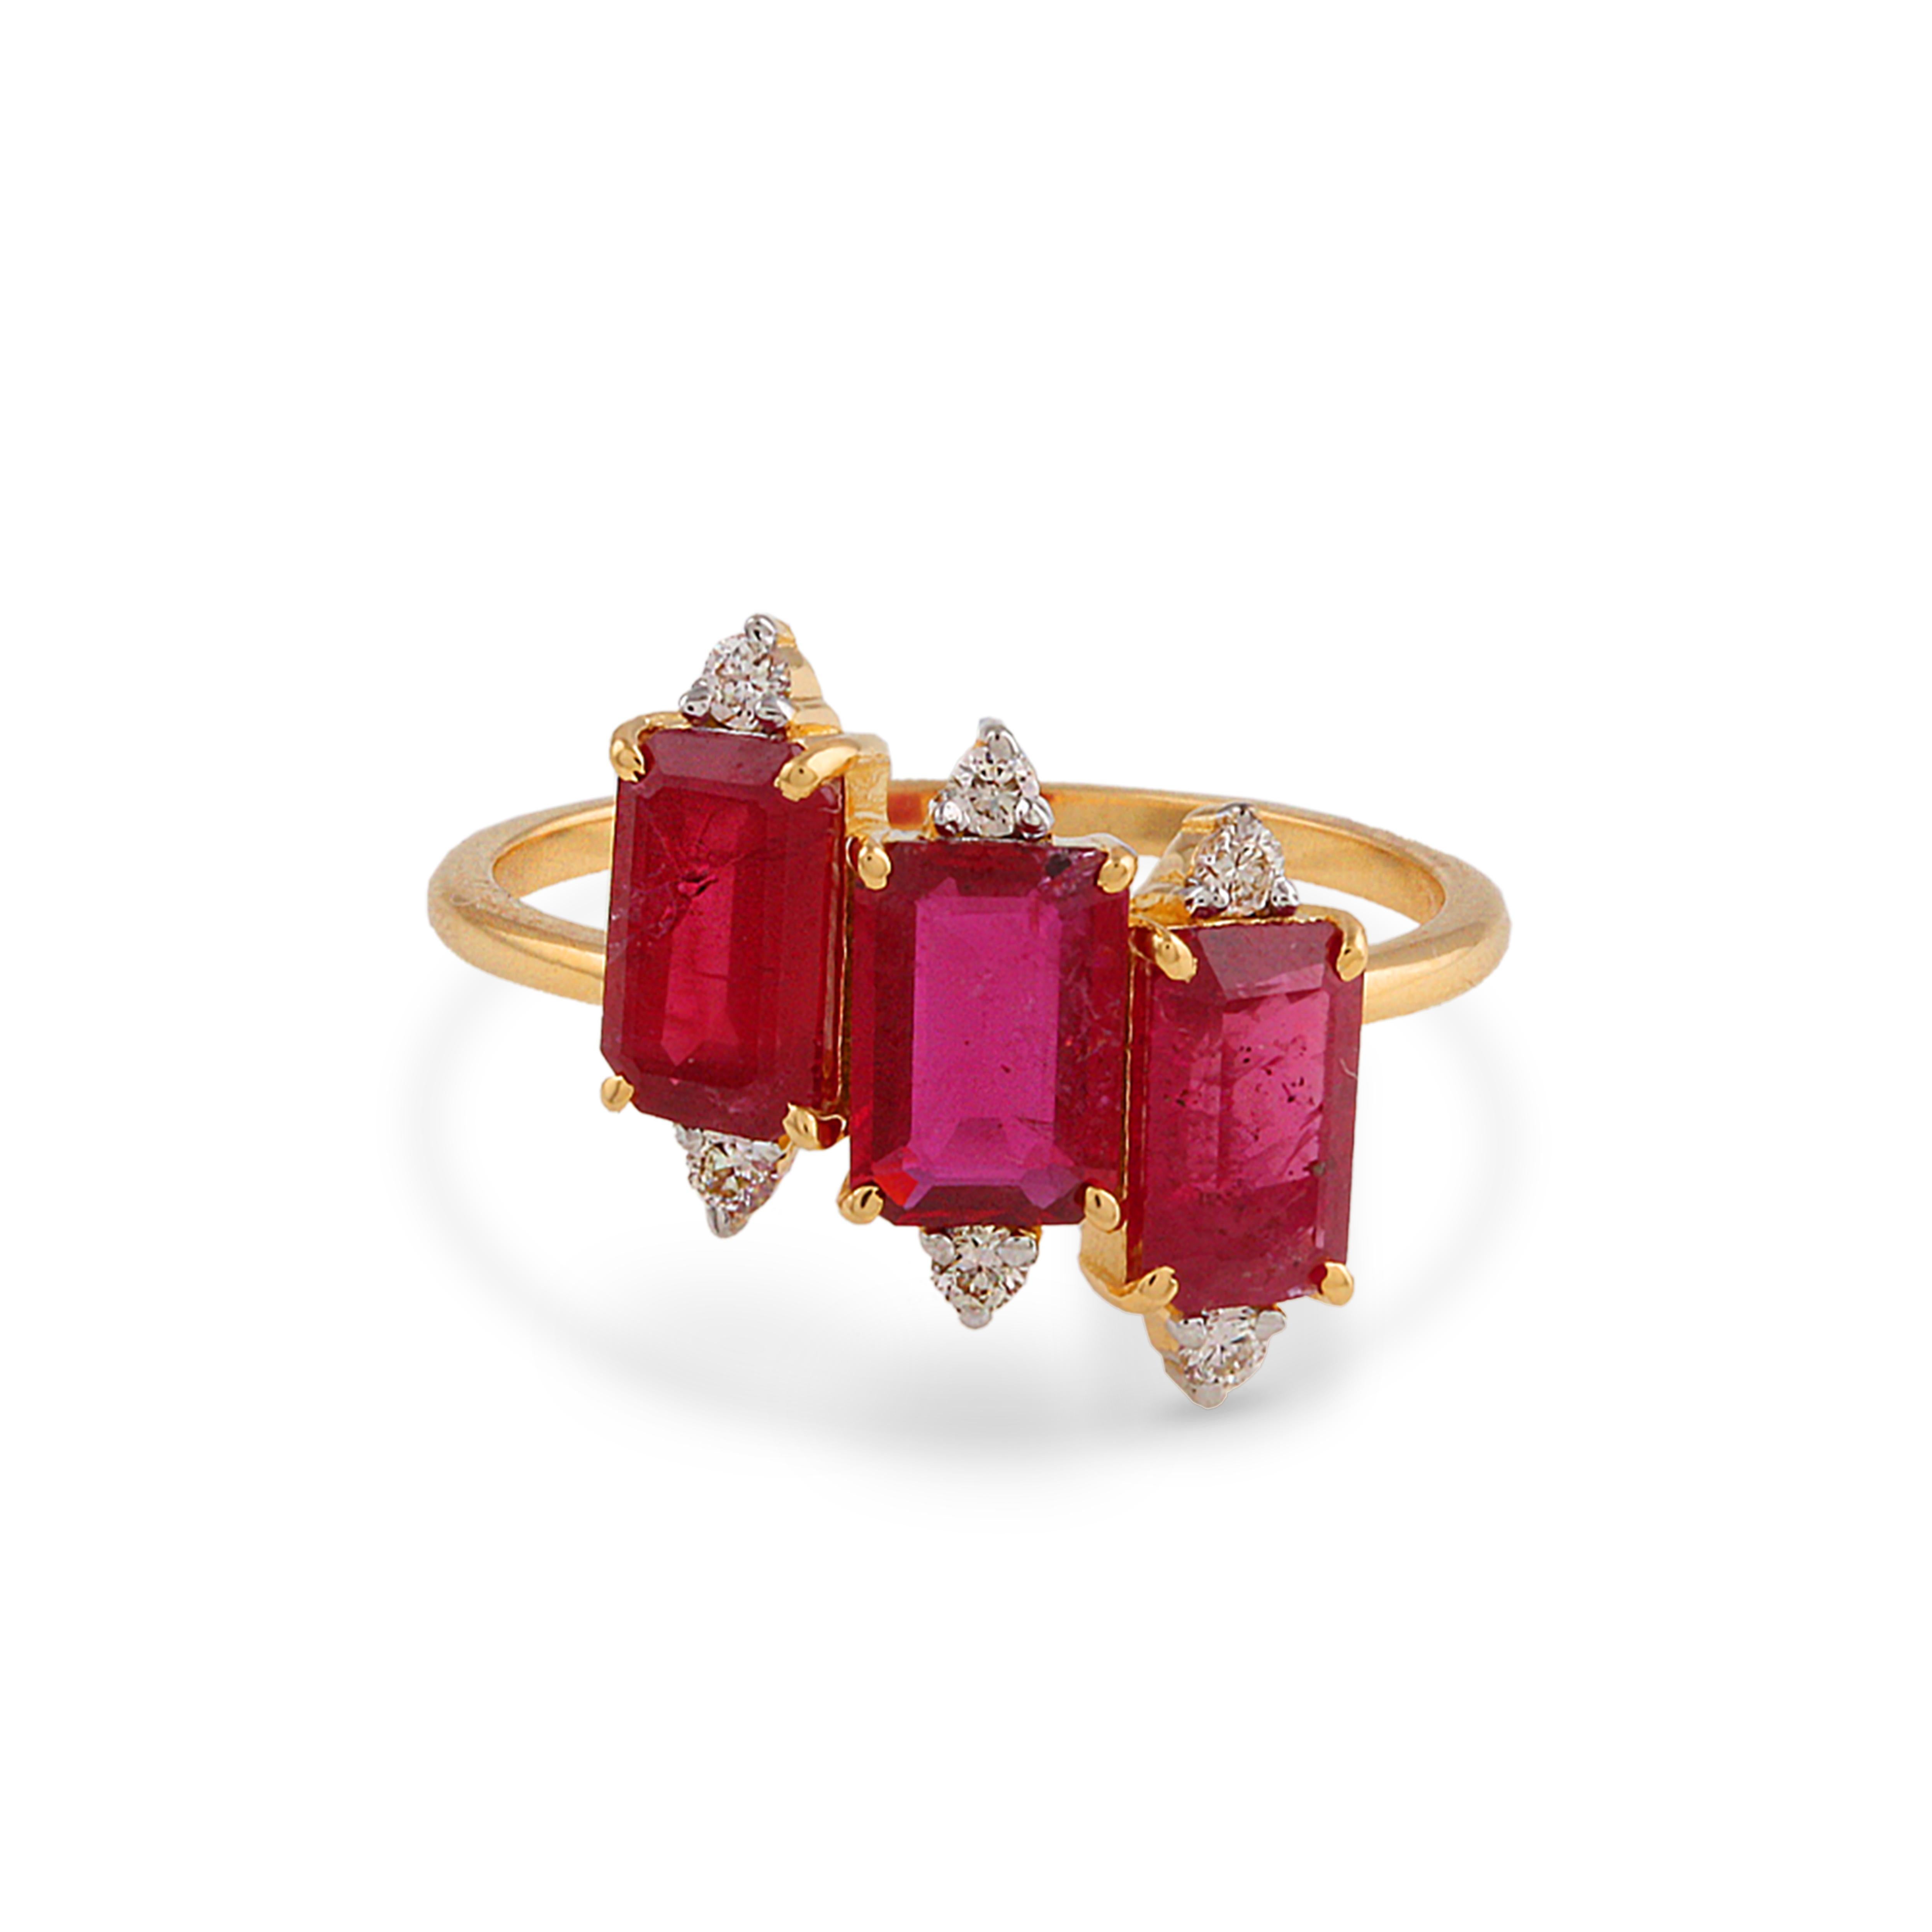 Tresor Beautiful Ring feature 1.50 carats of Ruby and 0.05 carats of Diamond. The Ring are an ode to the luxurious yet classic beauty with sparkly gemstones and feminine hues. Their contemporary and modern design make them perfect and versatile to